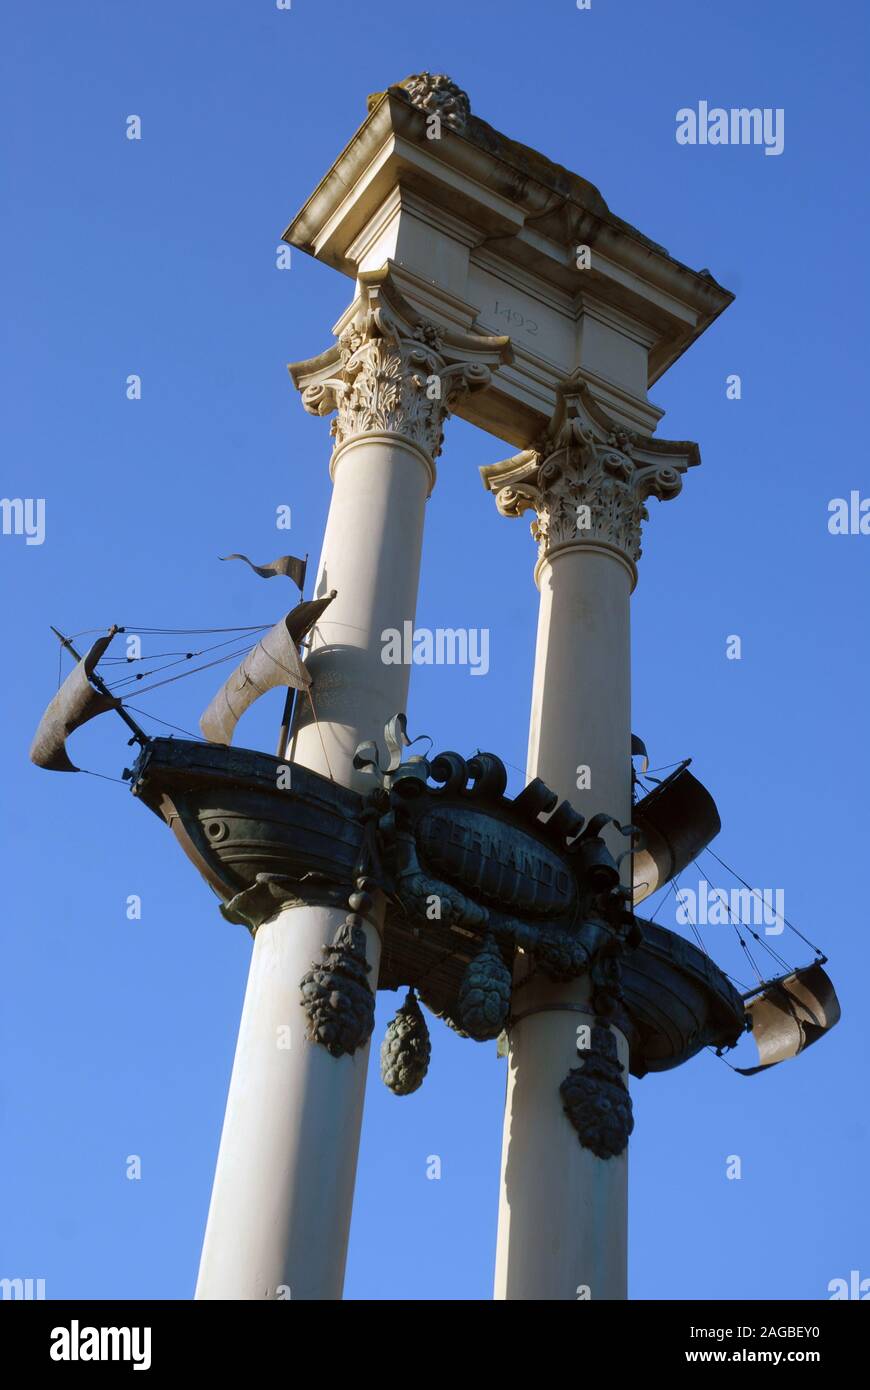 Christopher Columbus monument in Jardines de Murillo park, Seville, Andalusia, Spain. Stock Photo